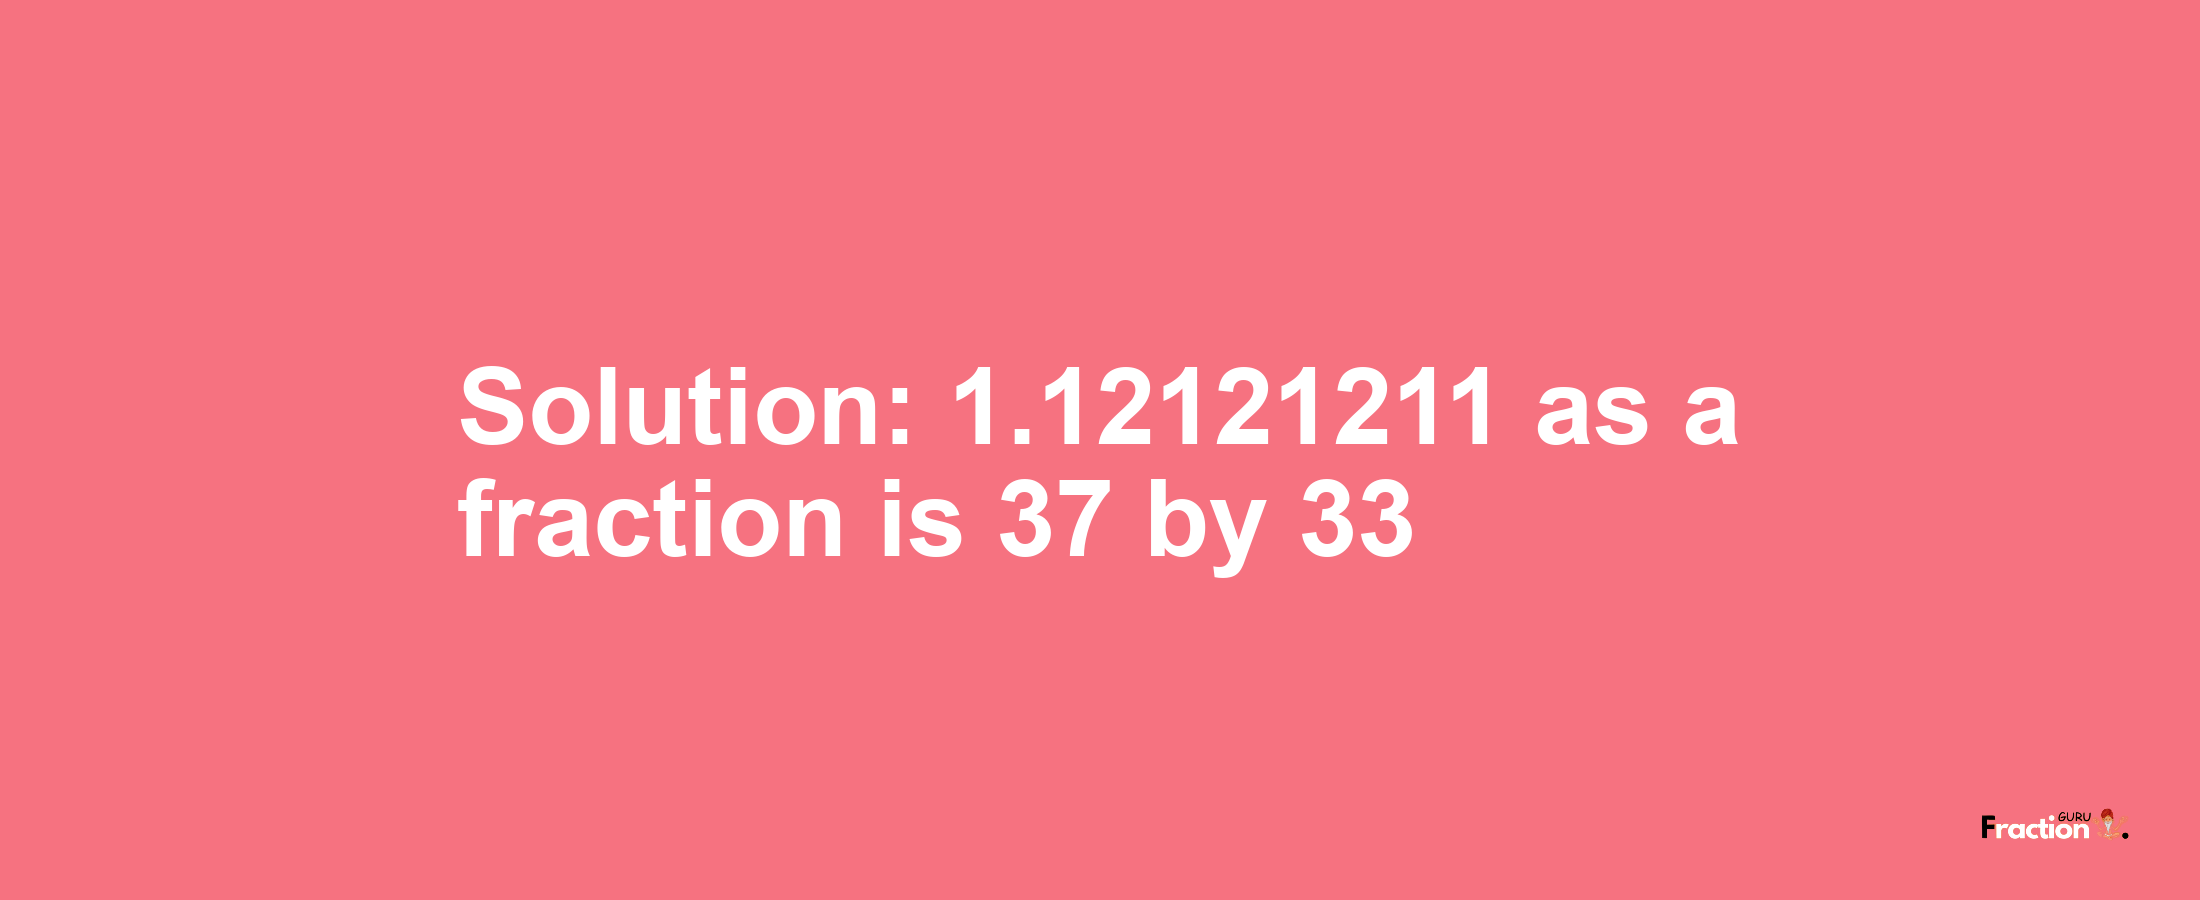 Solution:1.12121211 as a fraction is 37/33